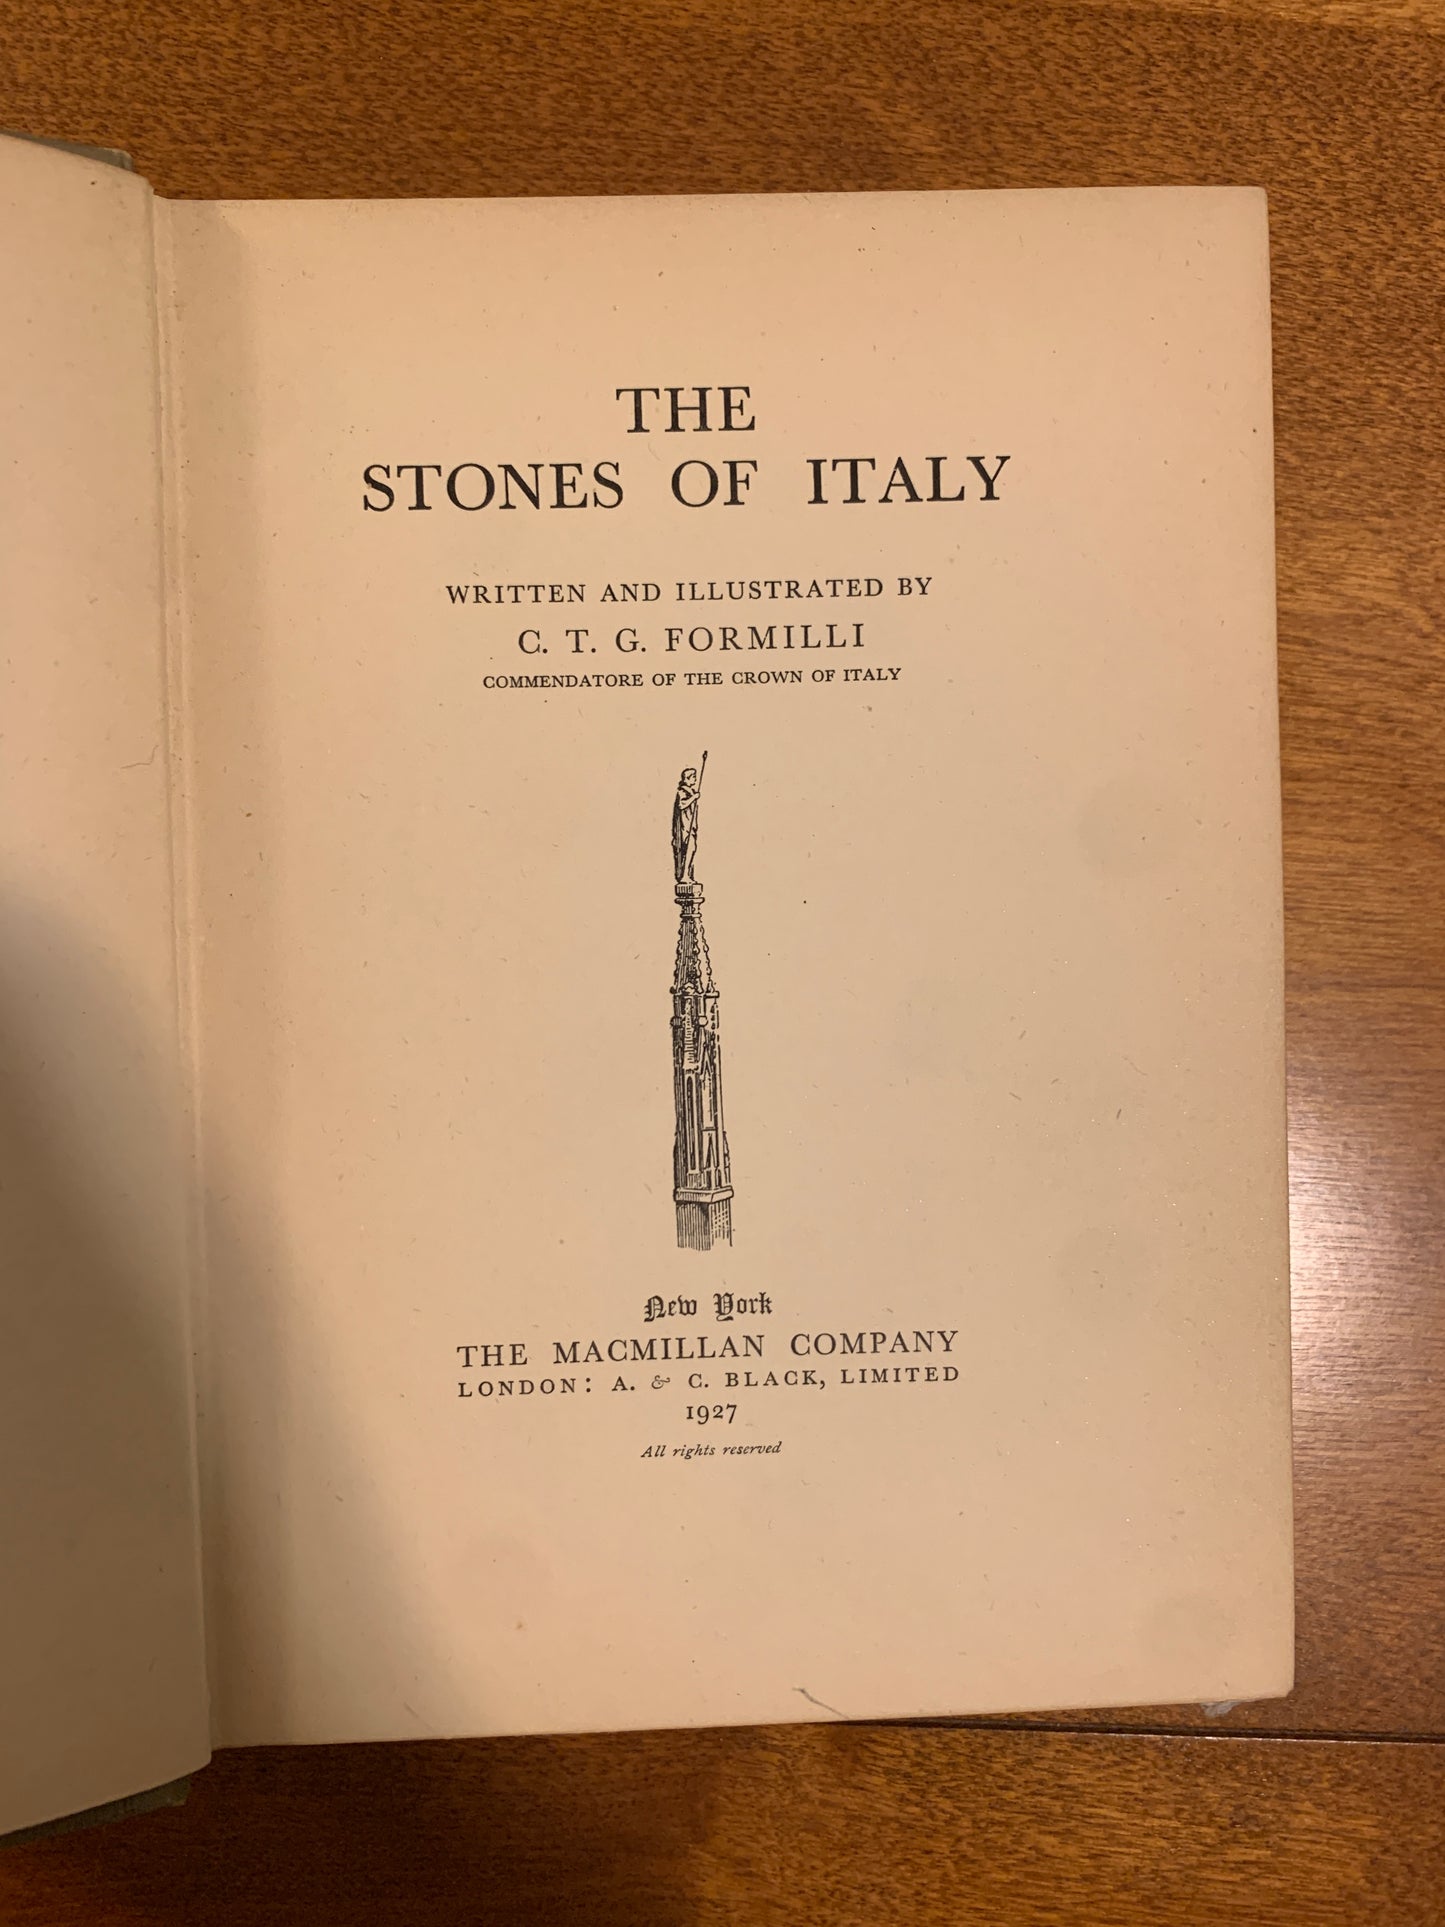 The Stones of Italy by C.T.G.Formilli, 1927